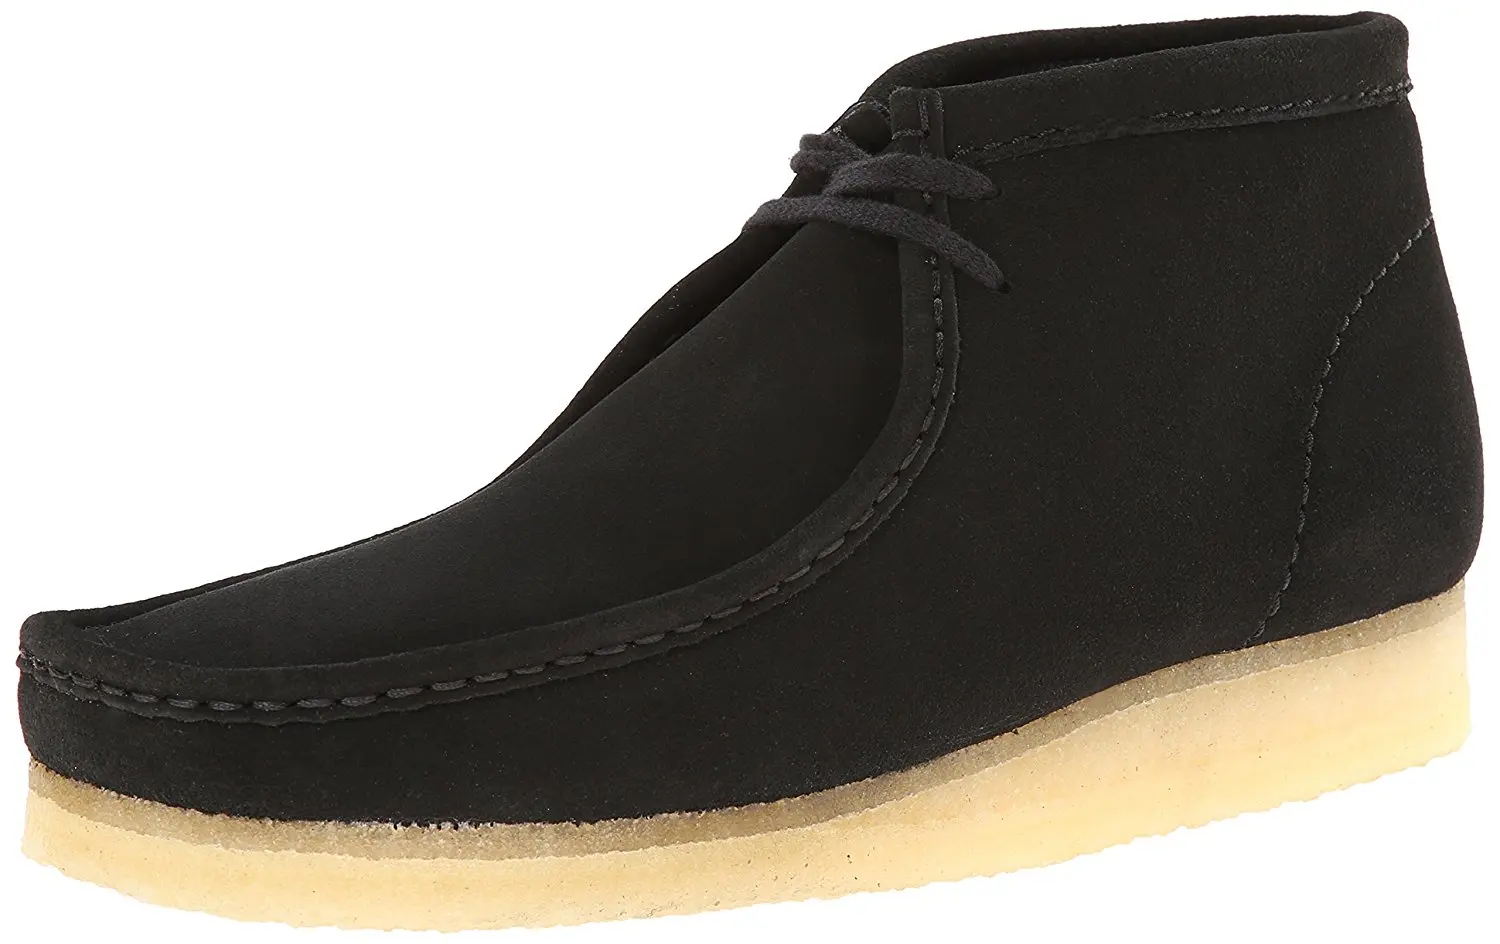 wallabee boots mens